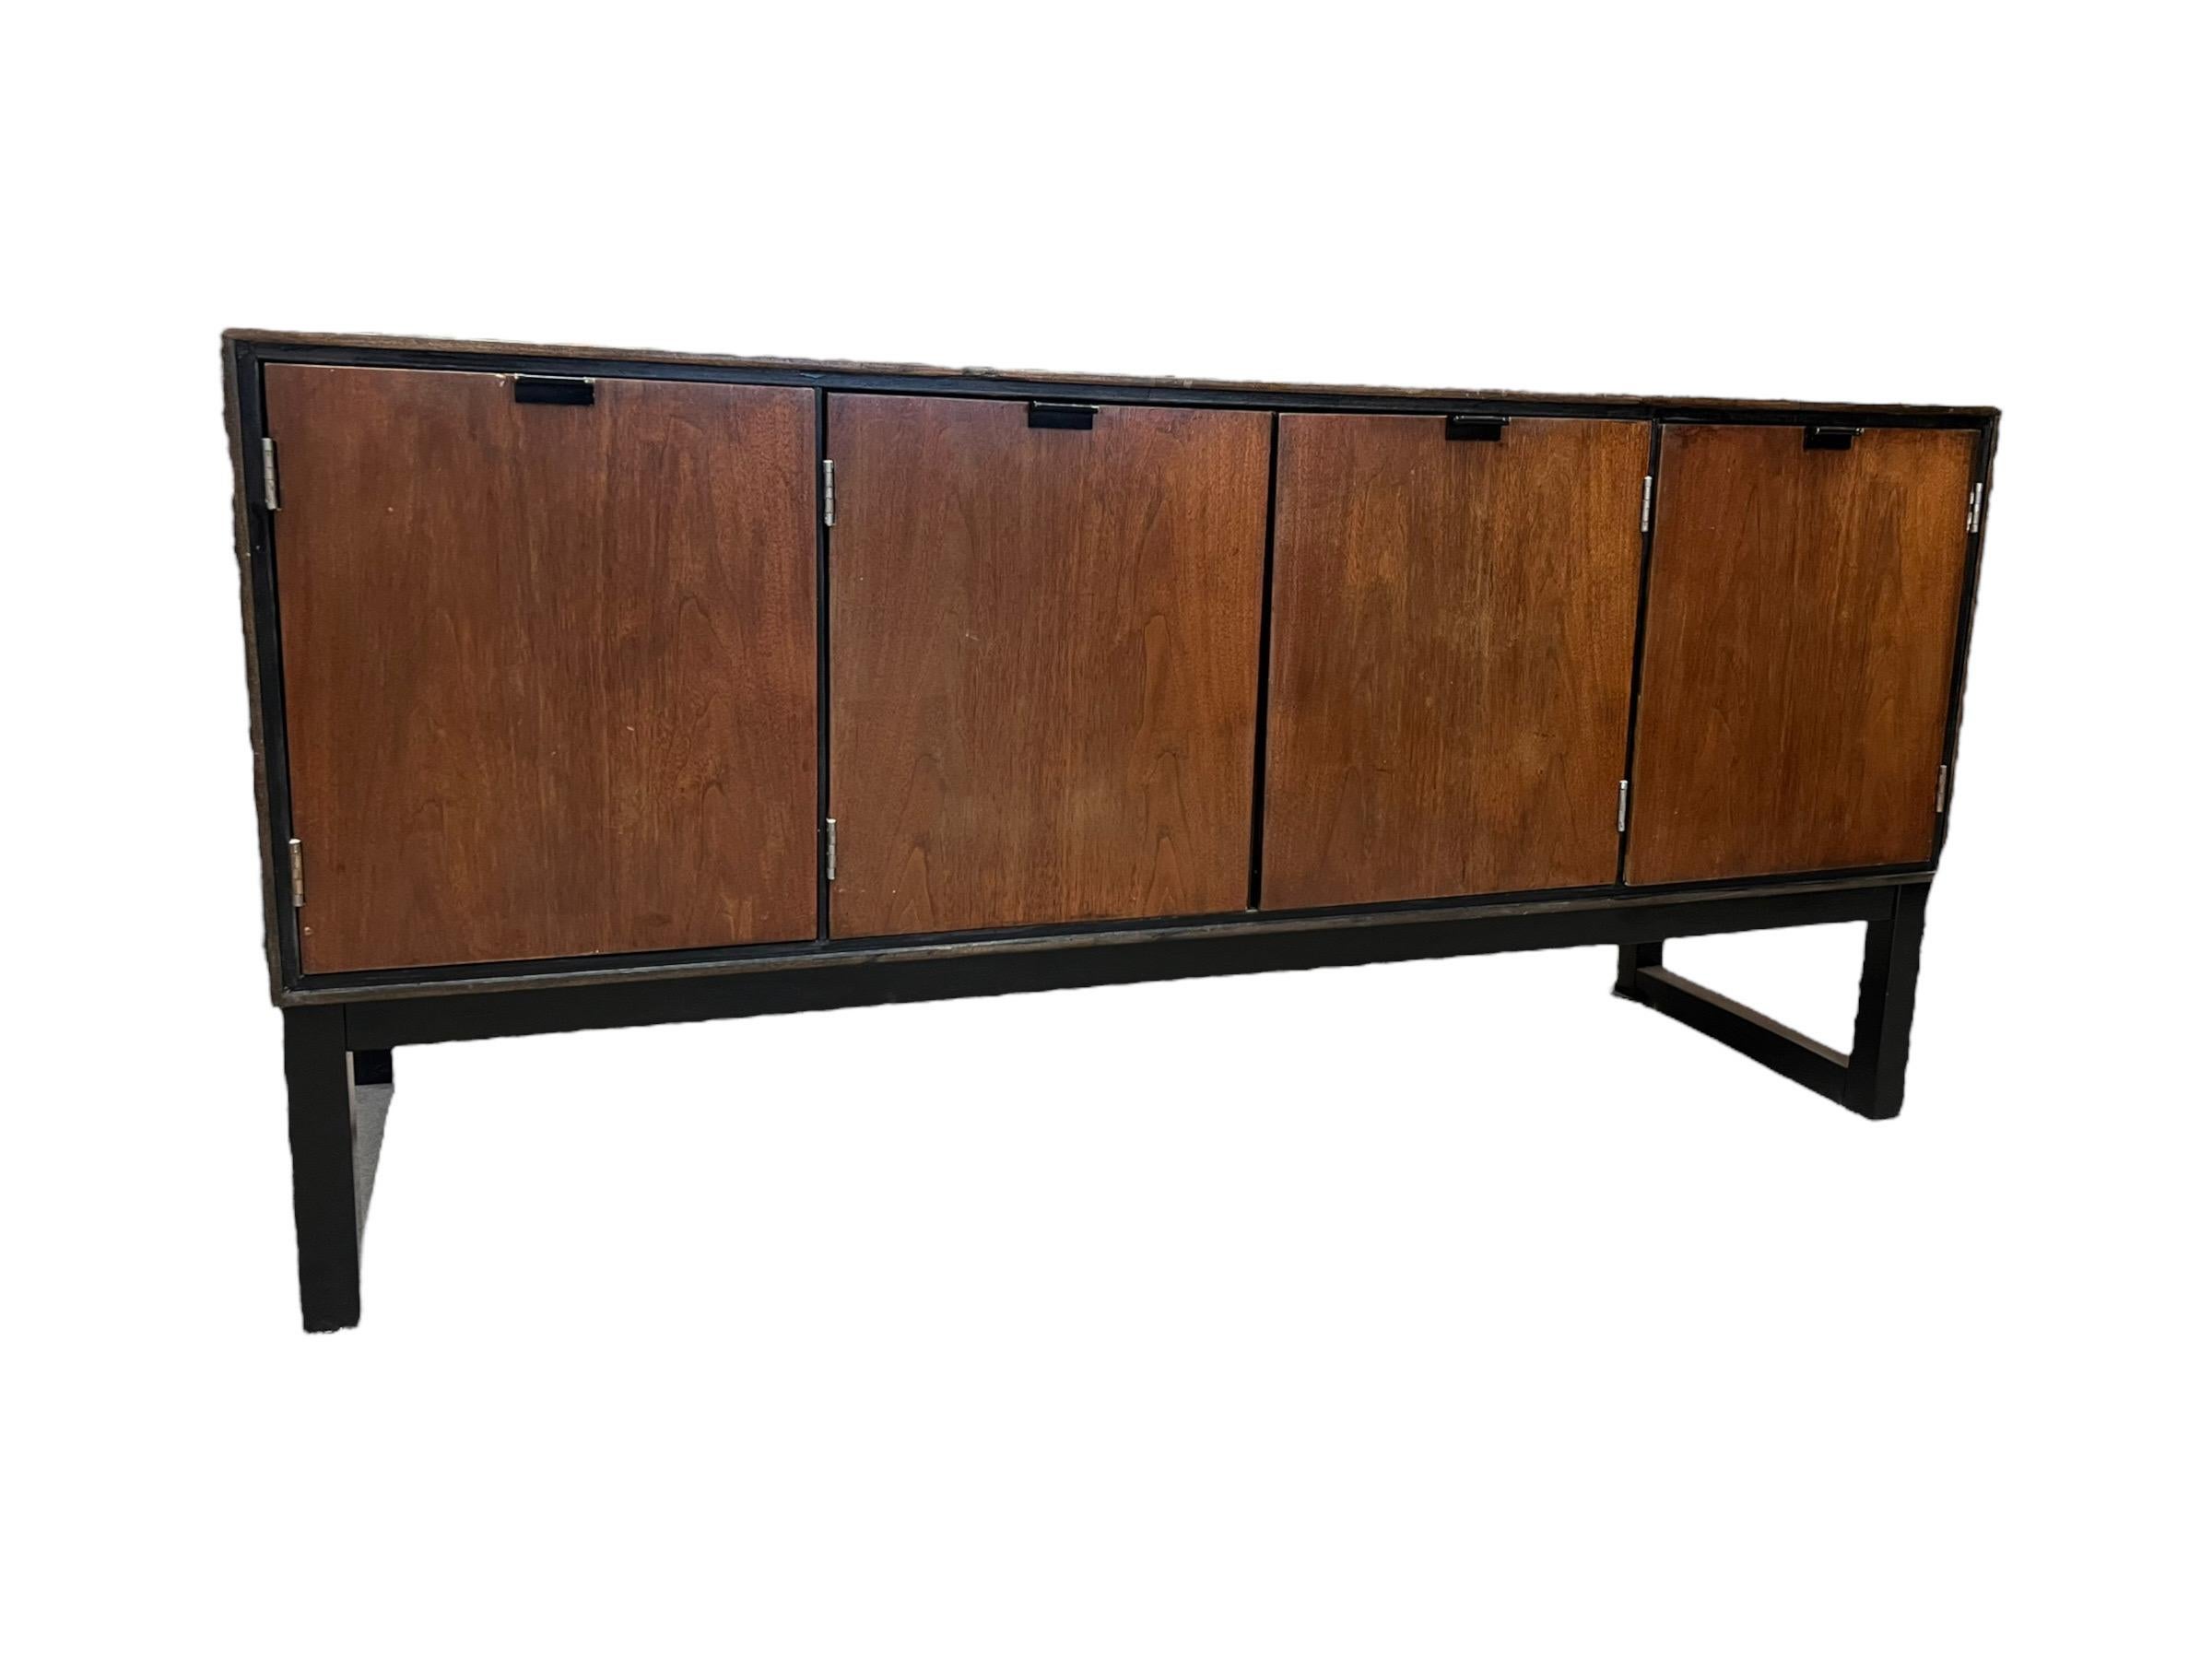 MCM Credenza by Stanley, walnut, brass and ebonized pulls on four doors, ebonized block feet, two interior drawers and shelves. Shelves are removable

Dimensions. 58W 18D 28H
Left cabinet inside : 13W 16D 15.5H
Center cabinet 28W 16D 15.5H